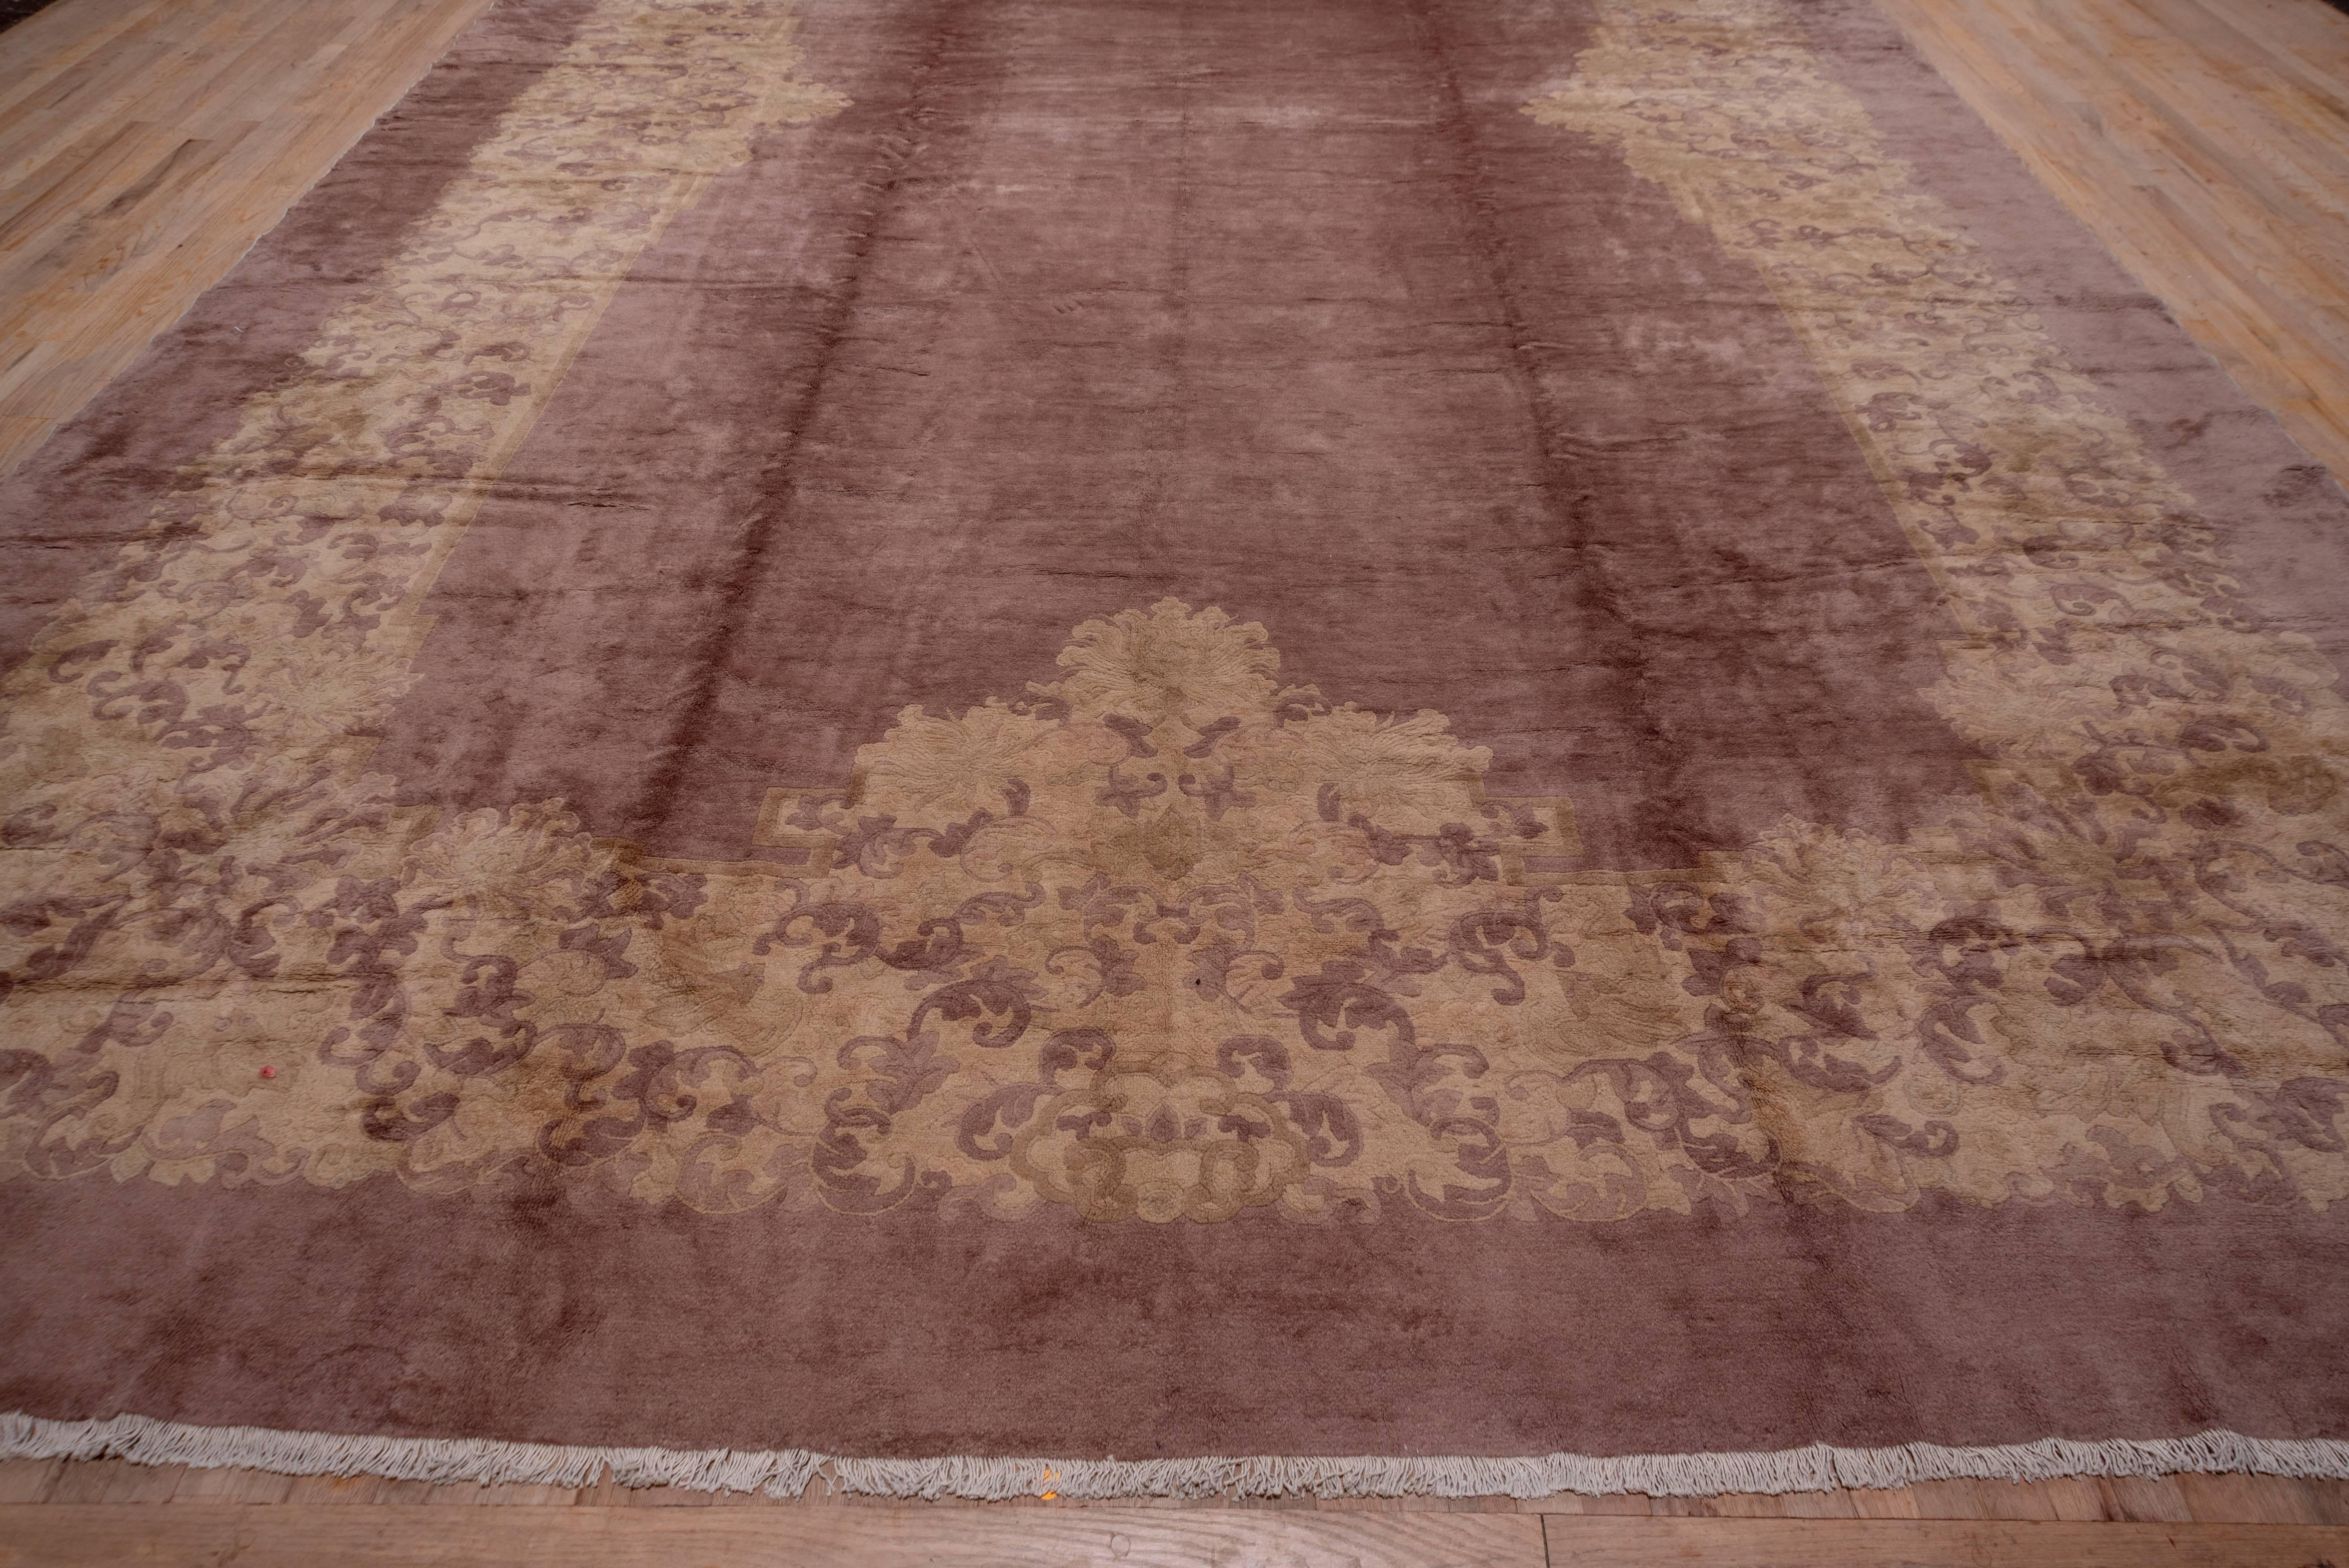 The Fette workshop was active in Peking in the interwar period and specialized in light-toned carpets with influences from early Chinese textiles, jades and bronzes. The open tan field of this large Fette is surrounded by and elaborate golden beige